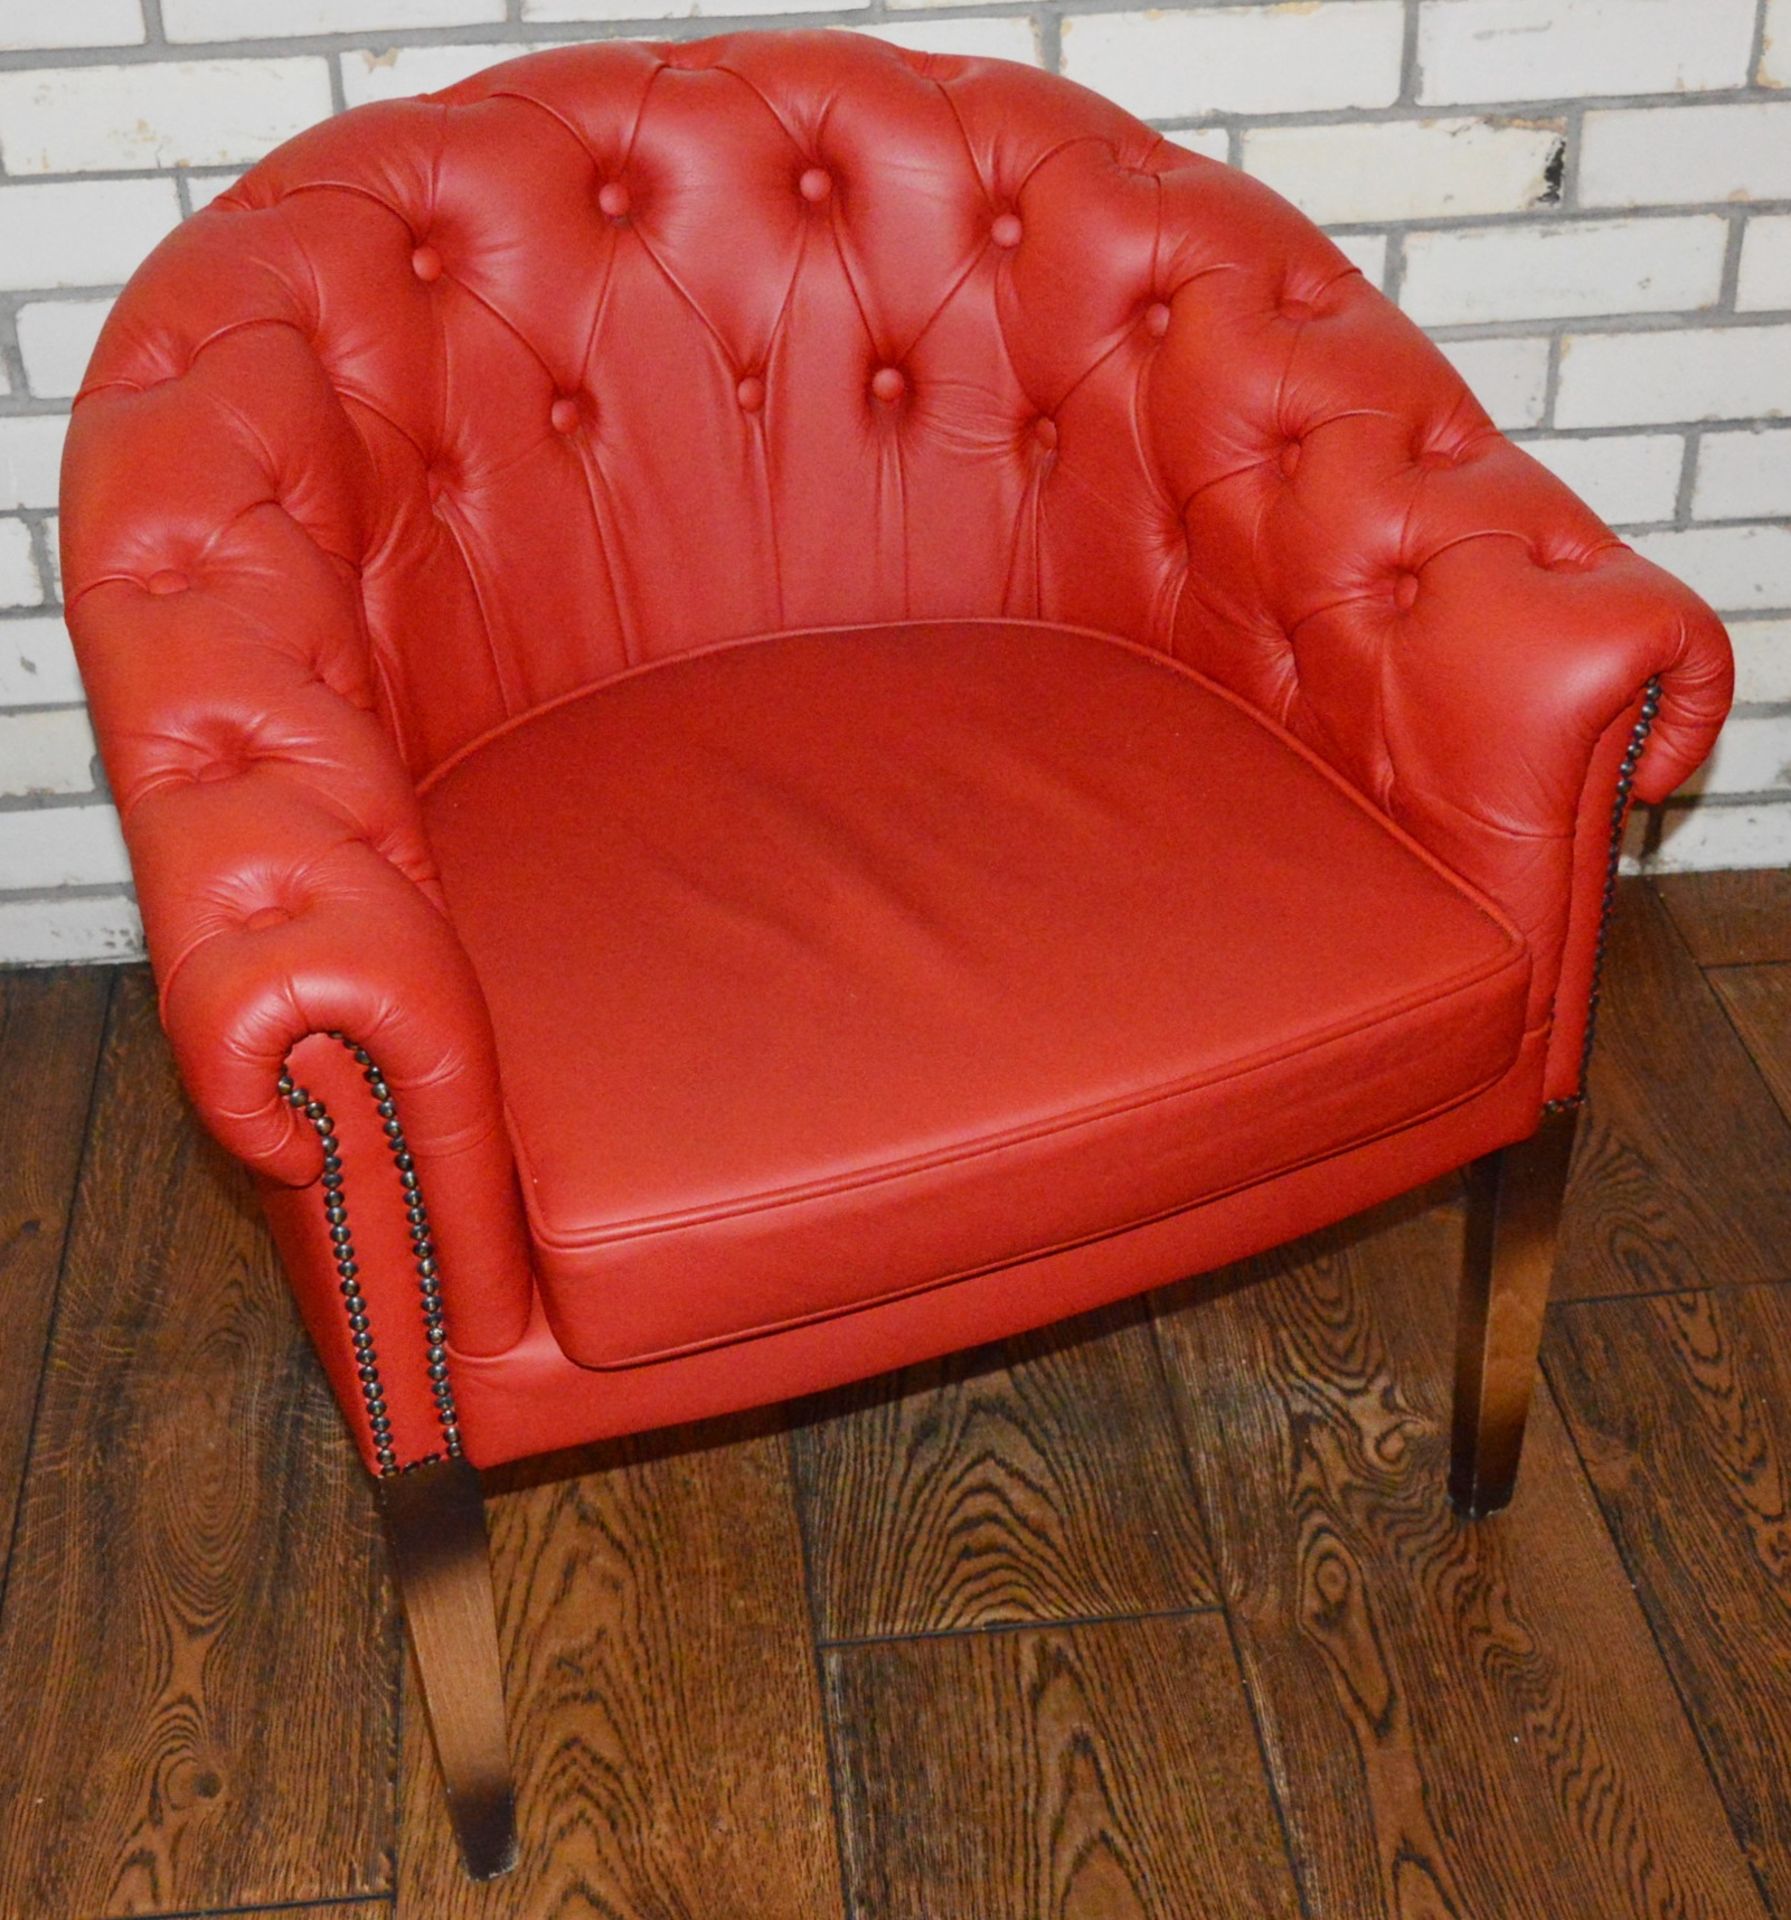 1 x Chesterfield Style Buttoned Back Red Leather Tub Chair With Hardwood Legs Finished in an - Image 4 of 8